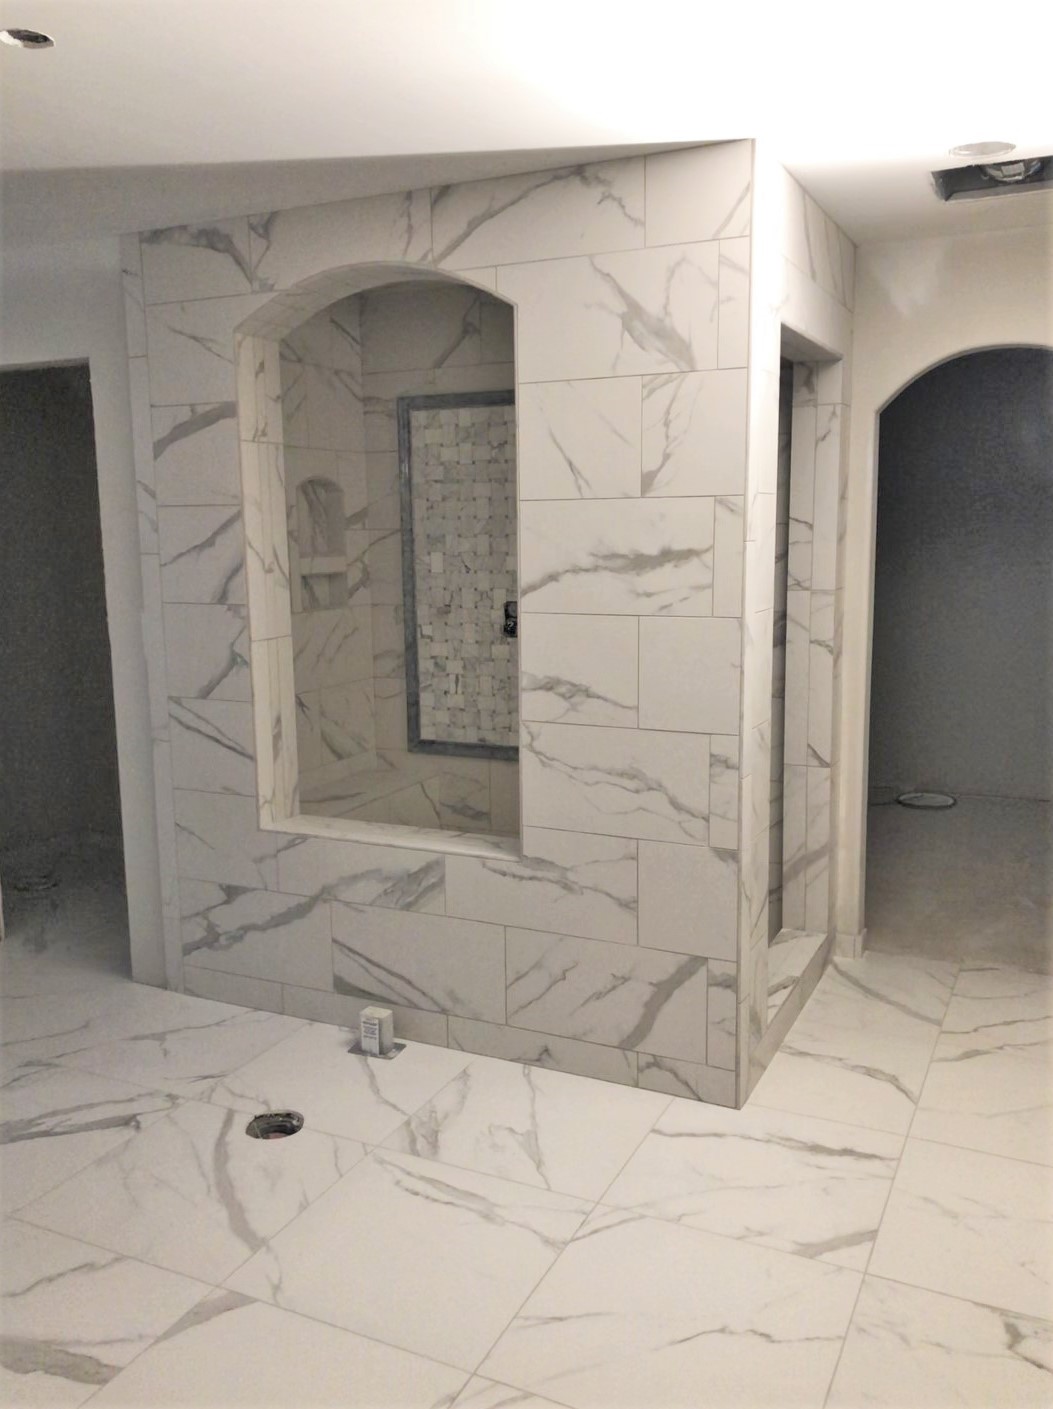 R &amp; R Ceramics LLC Residential and Commercial Bath Tile, Kitchen Tile, Floor Tile, Shelby Township, Michigan